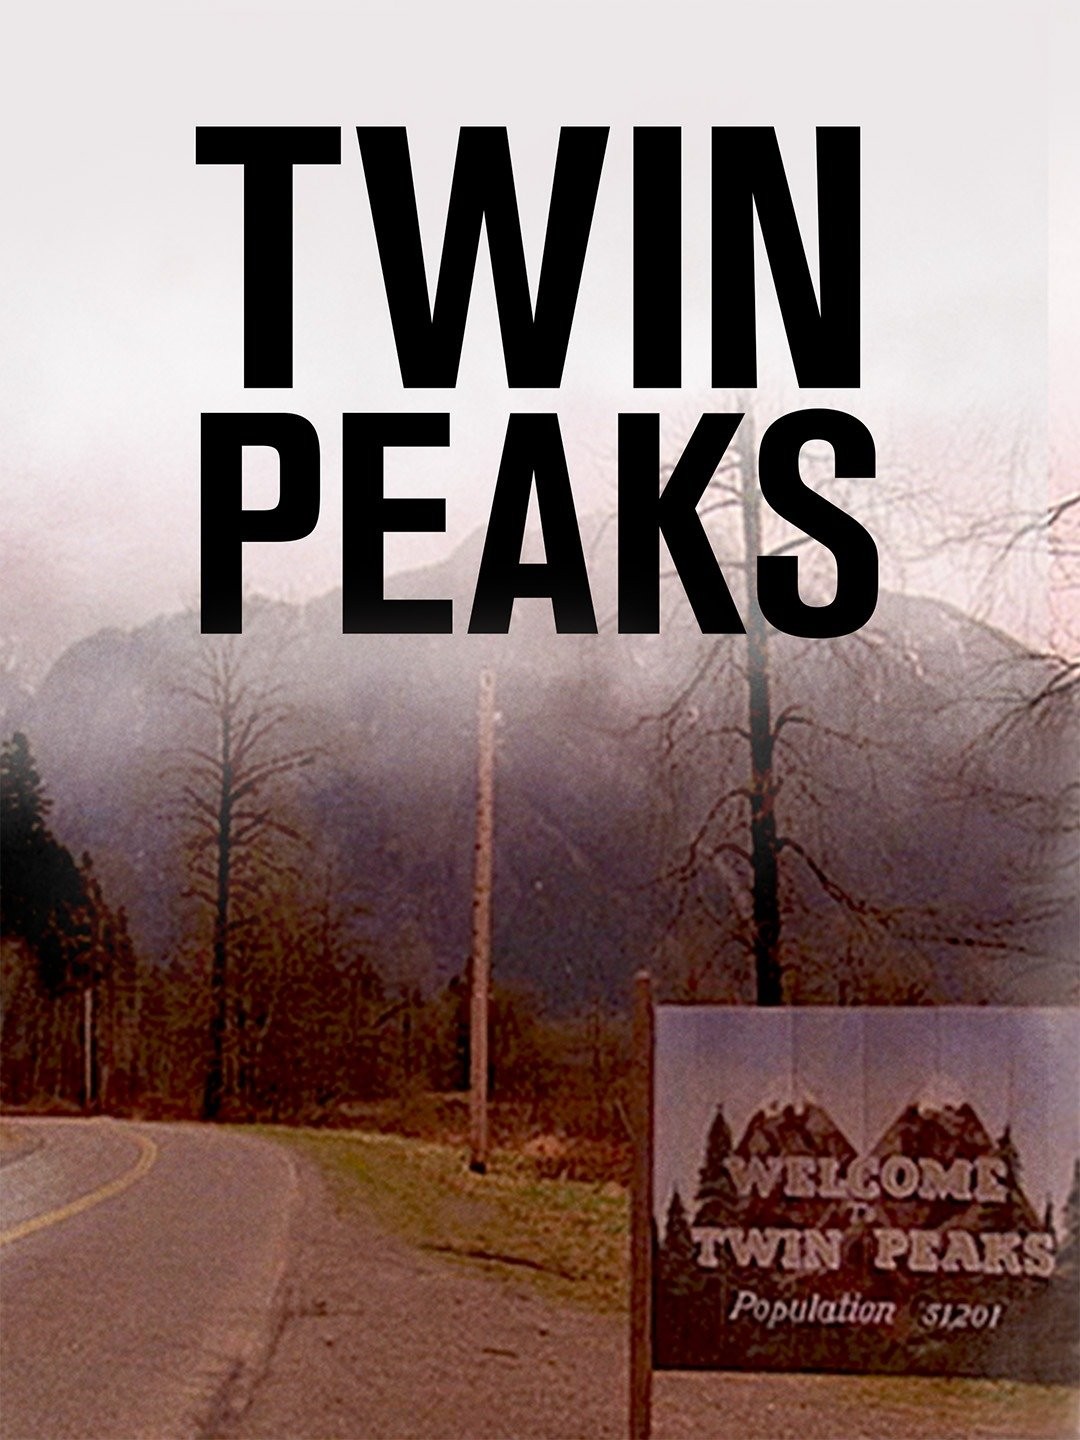 Twin Peaks Drive with a Dead Girl (TV Episode 1990) - IMDb